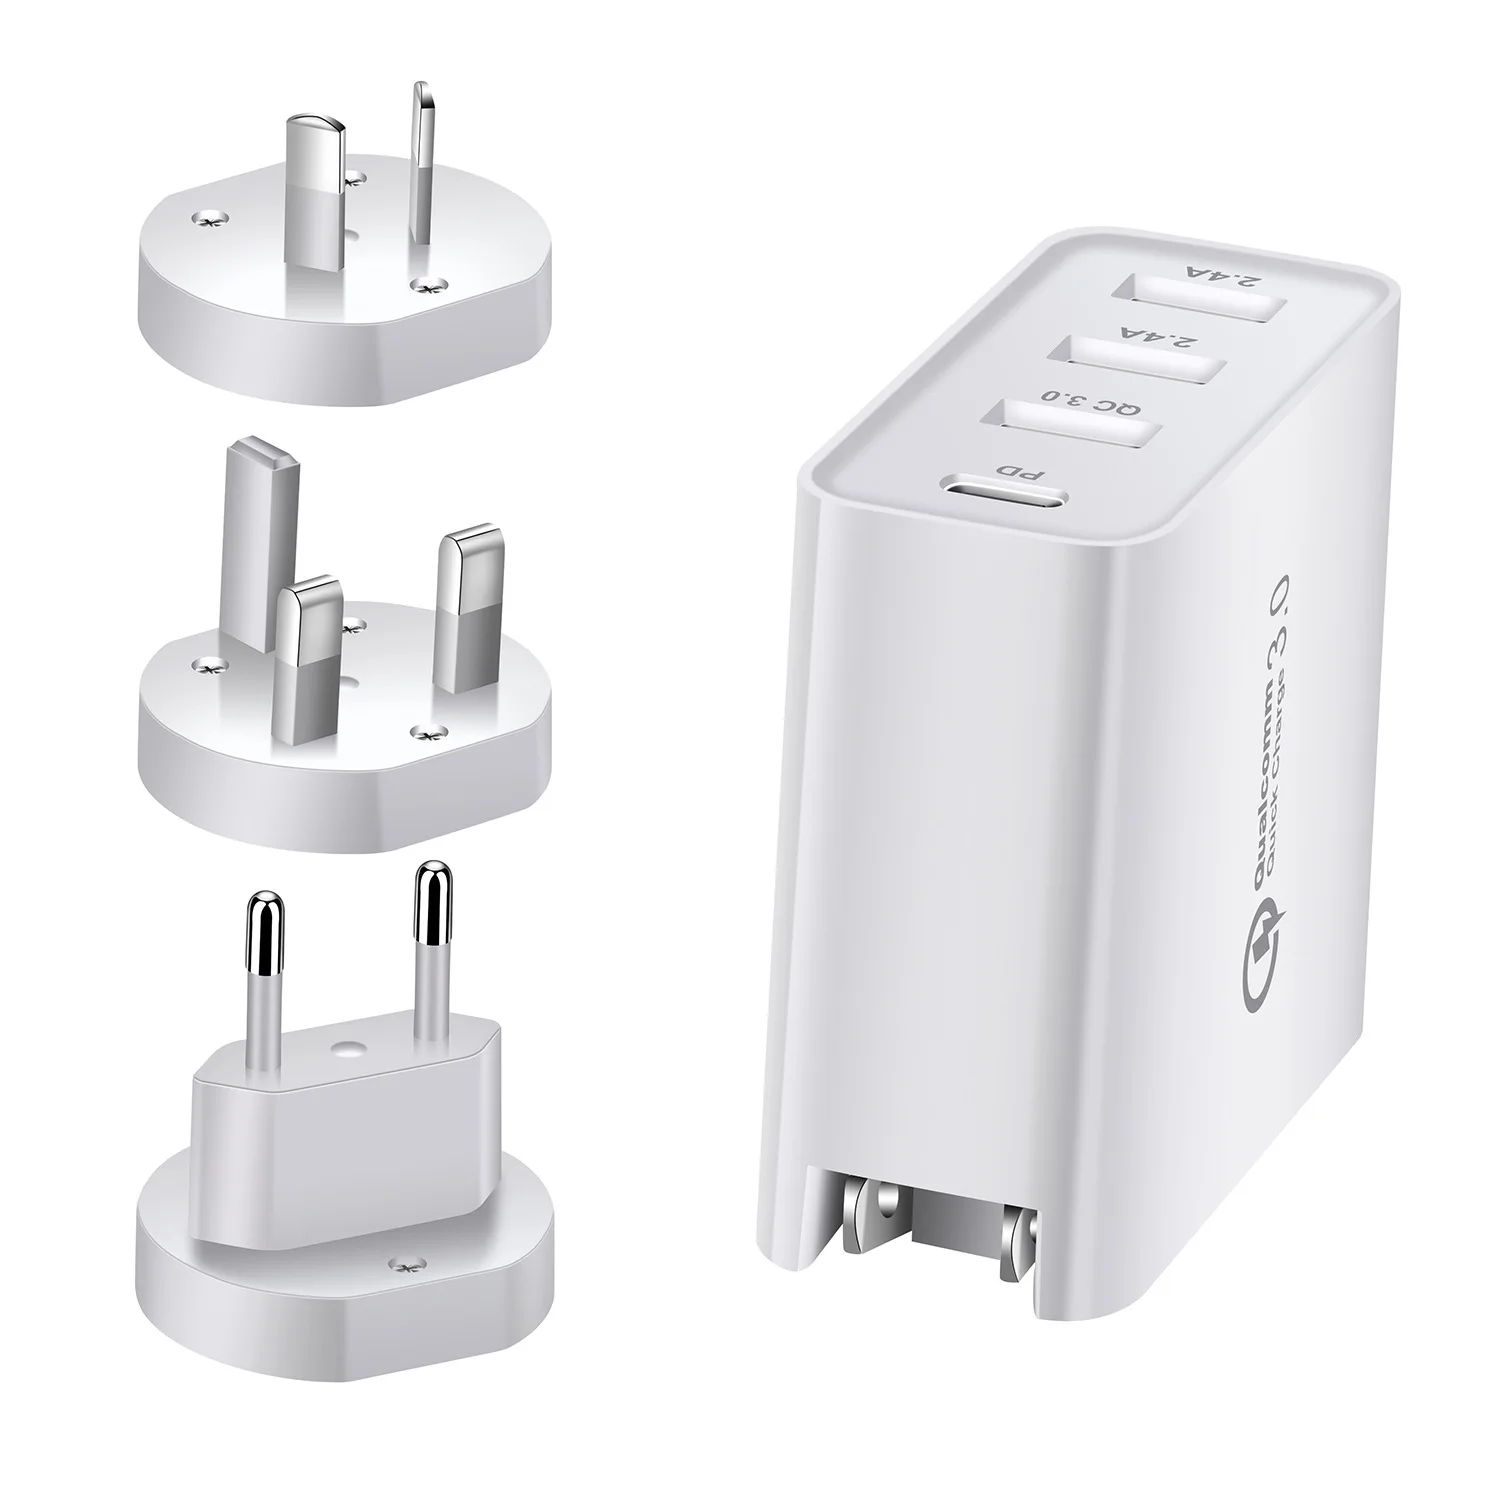 Three different type of plugs for use in different zone (White)